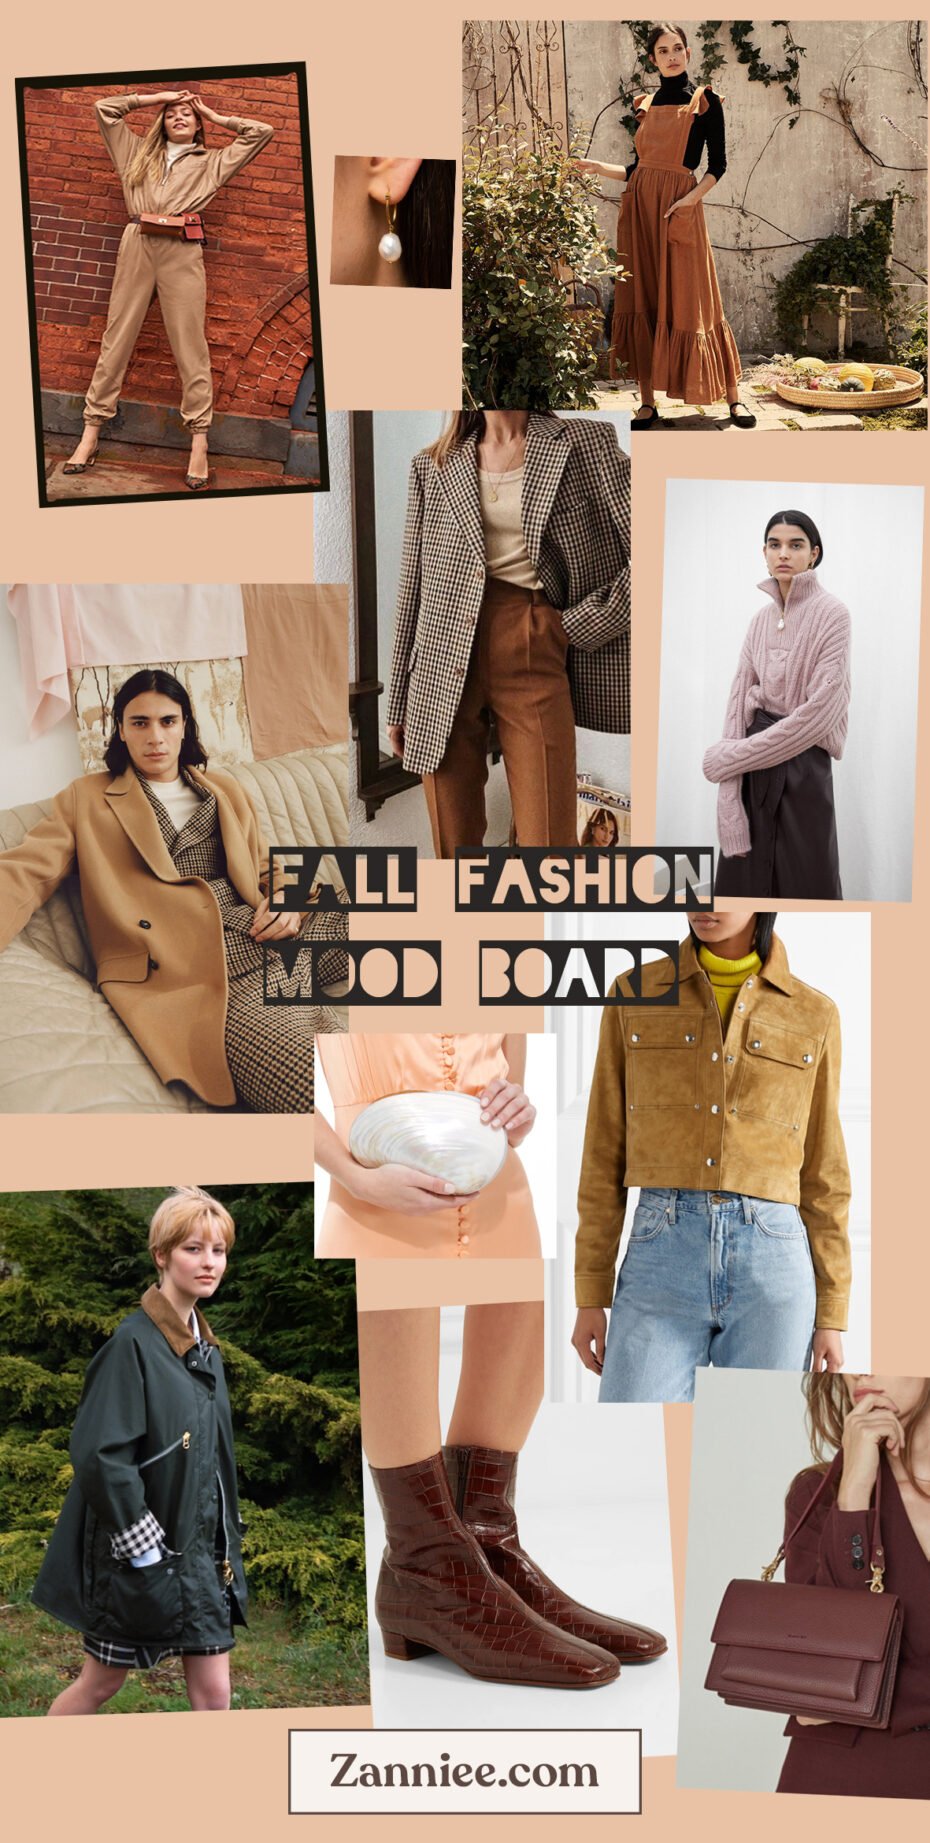 Autumn slow fashion inspiration: plaid, suede, corduroy, croc, camel, and cozy knits. Featuring sustainable fashion brands. 